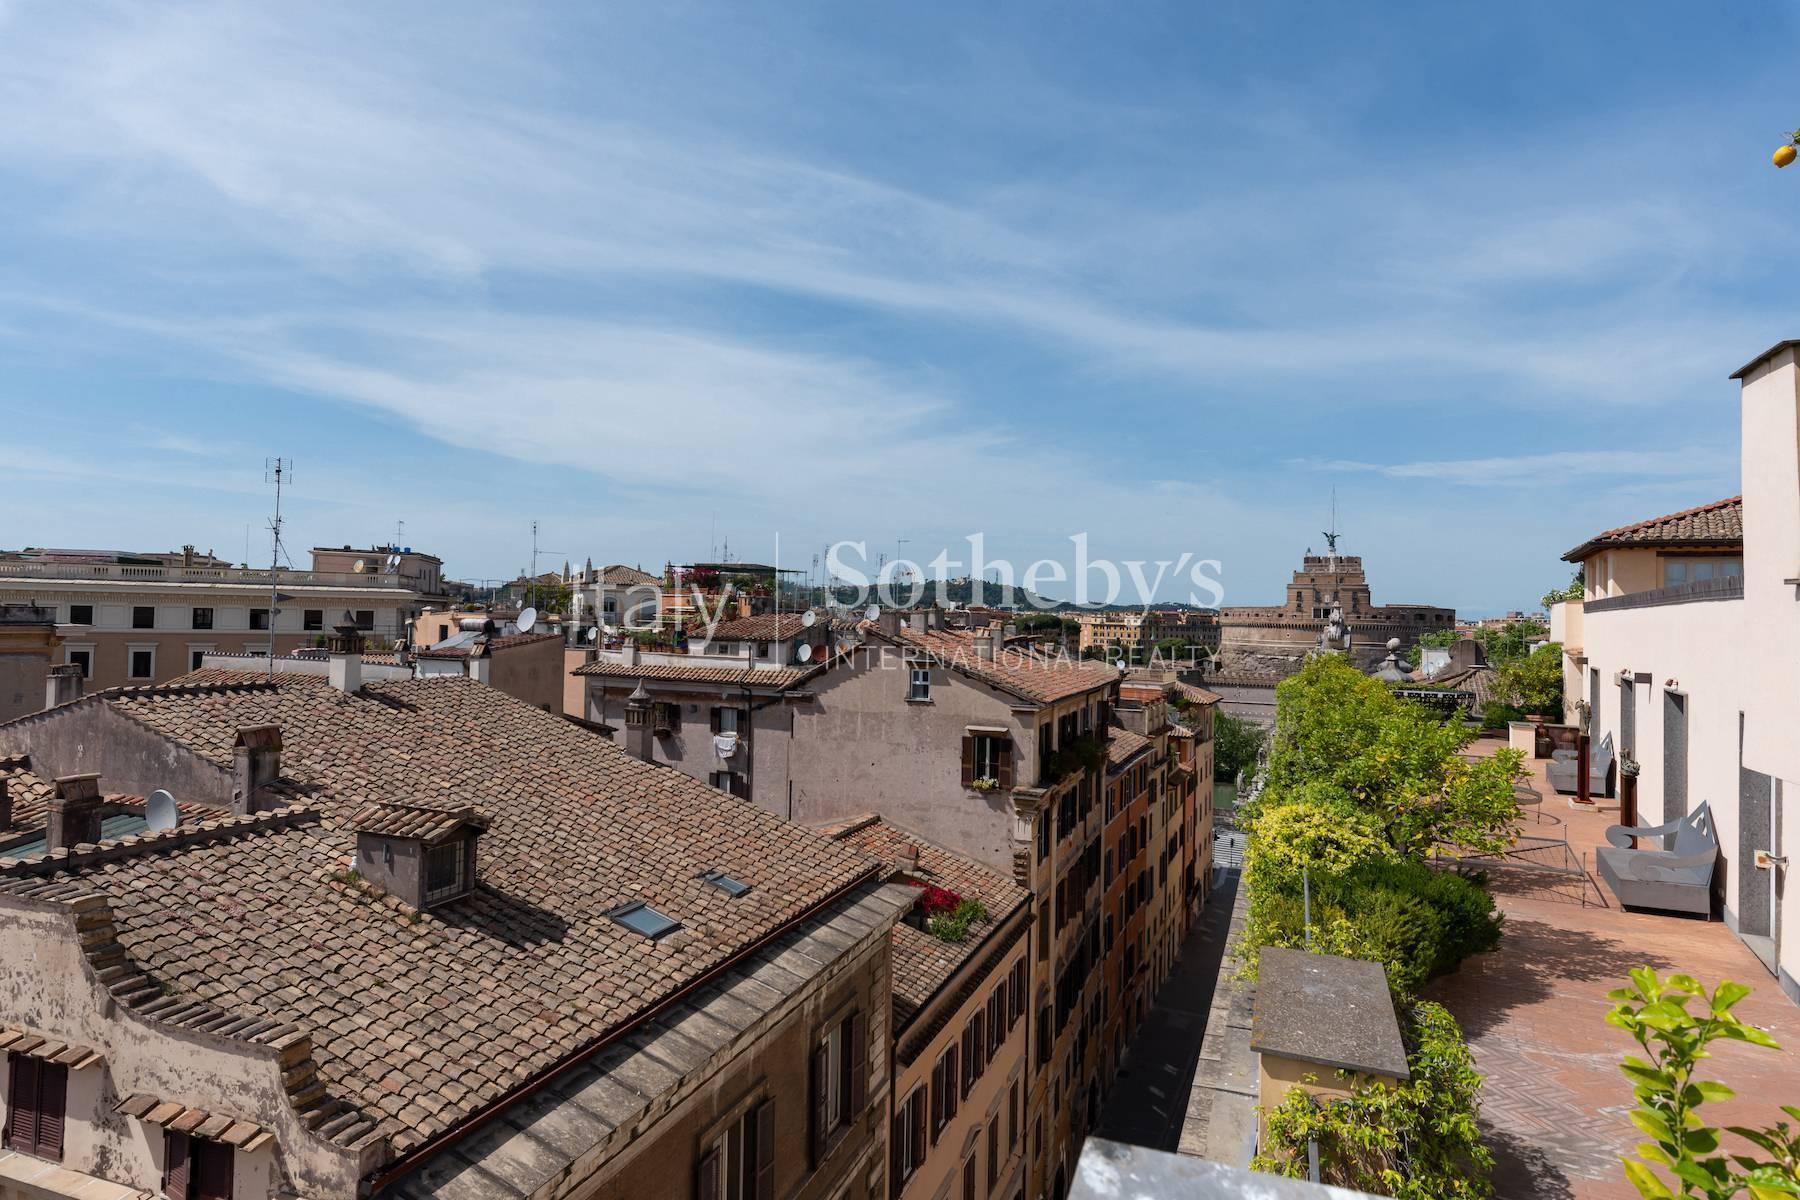 Apartment with terraces a stone's throw from Piazza Navona - 8